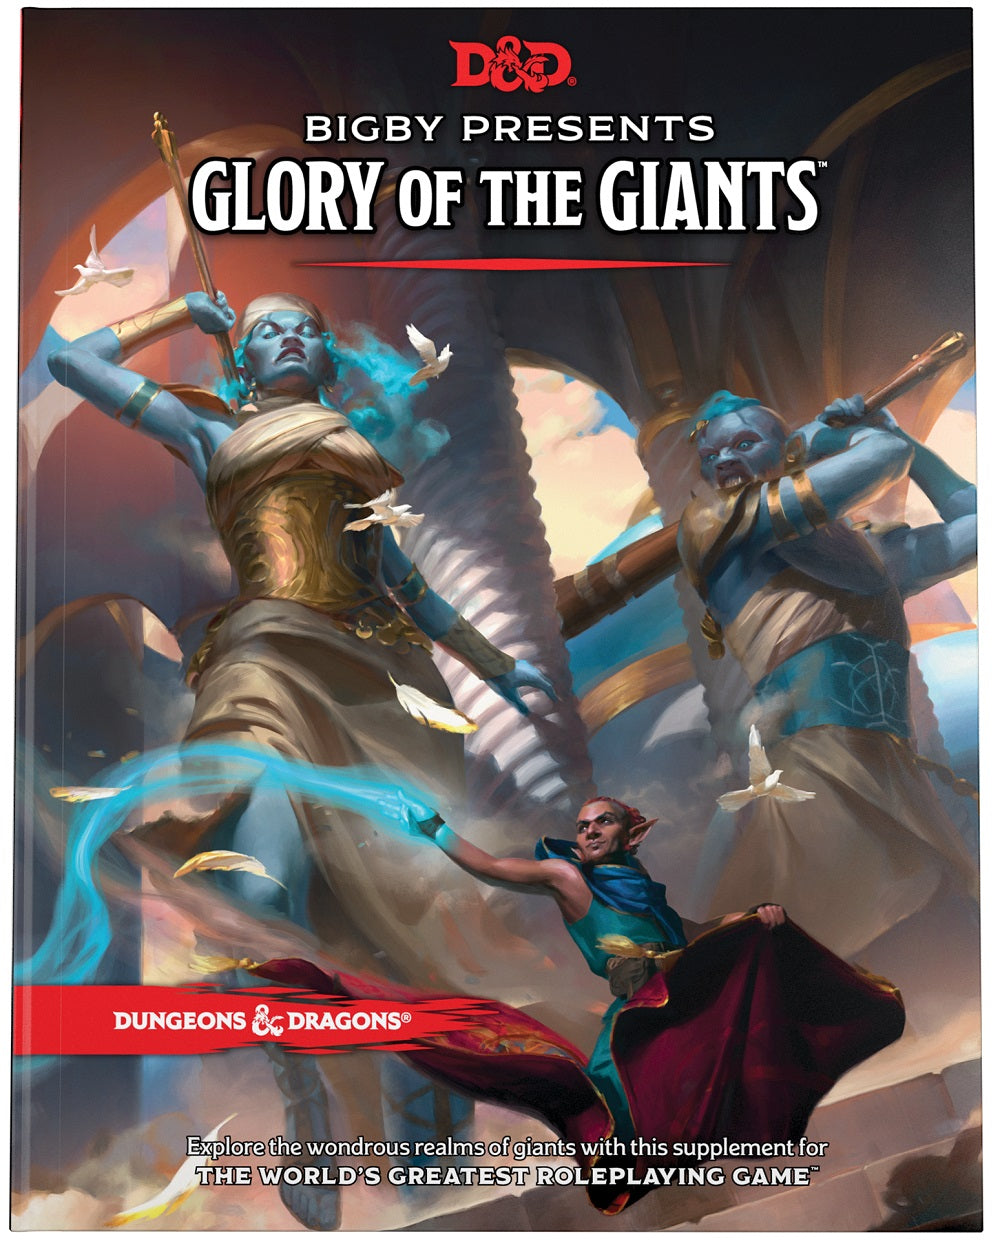 Dungeons & Dragons (DND) : Bigby Presents Glory of the Giants